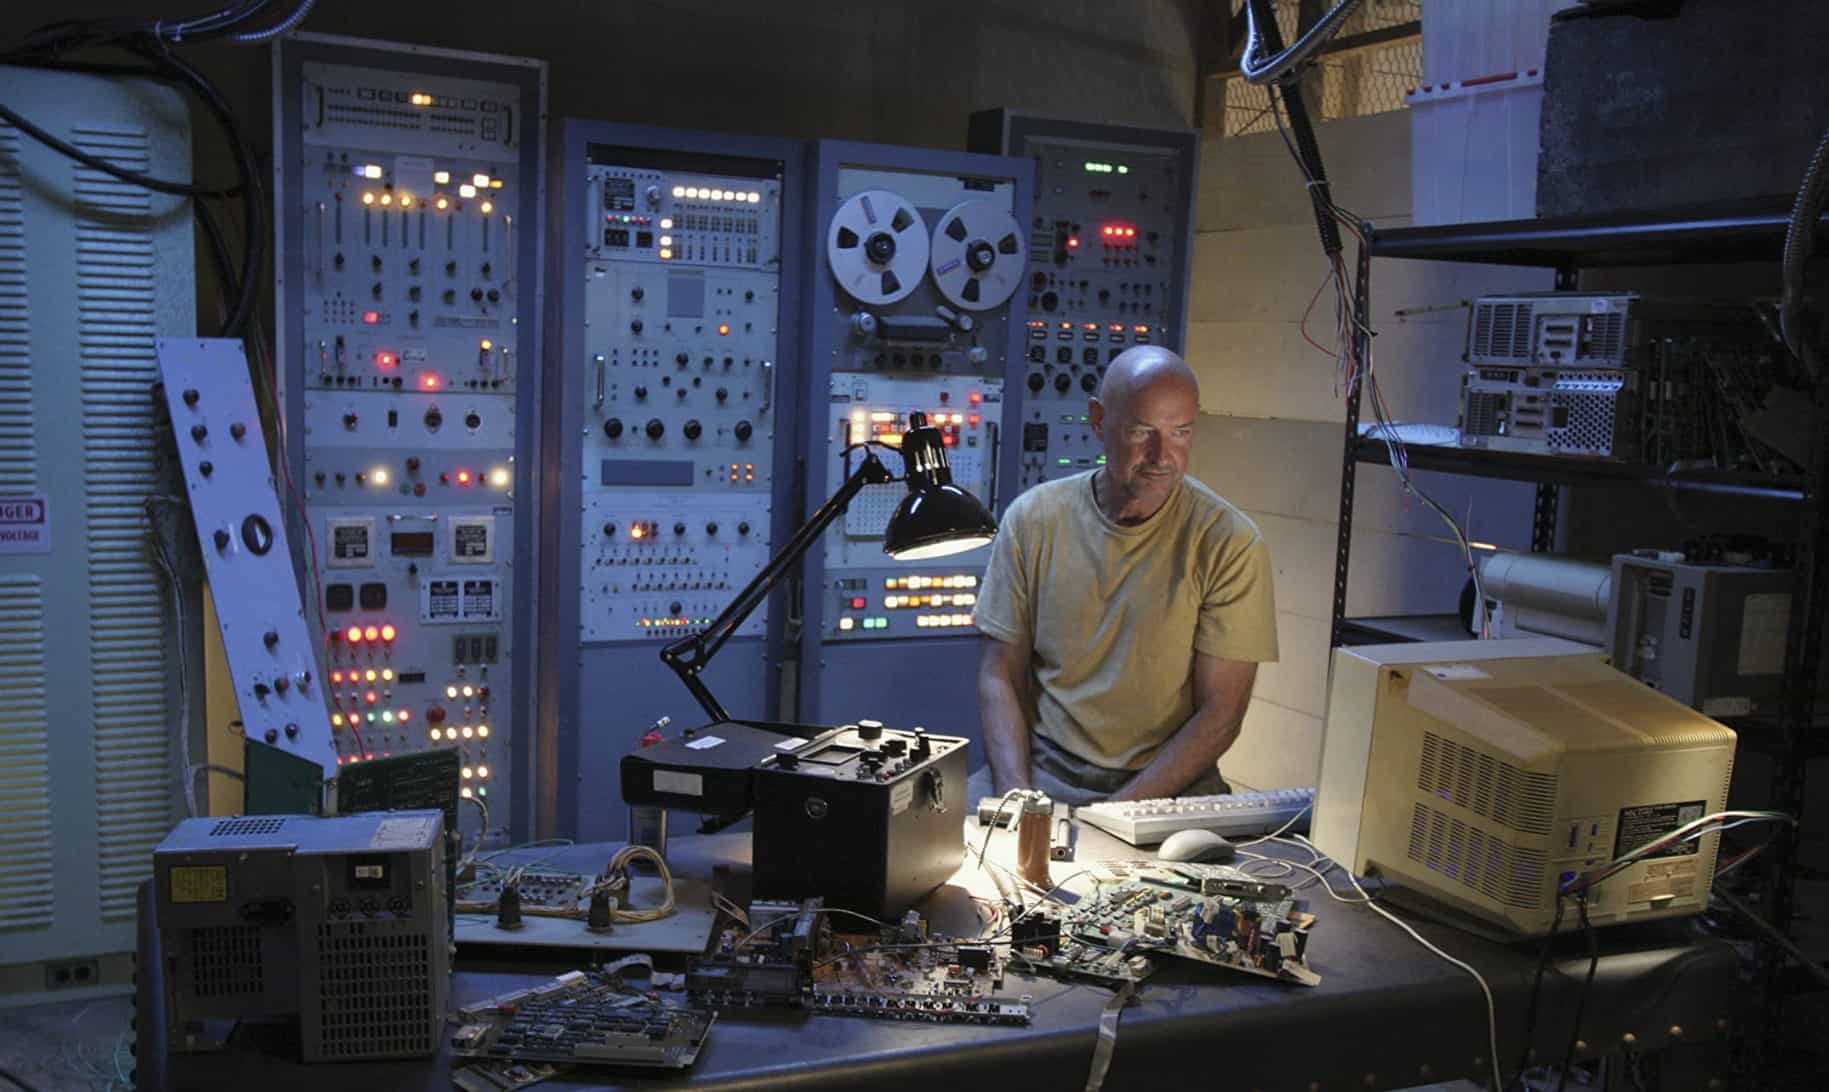 A man sits in a room full of electronics in this image from Hulu